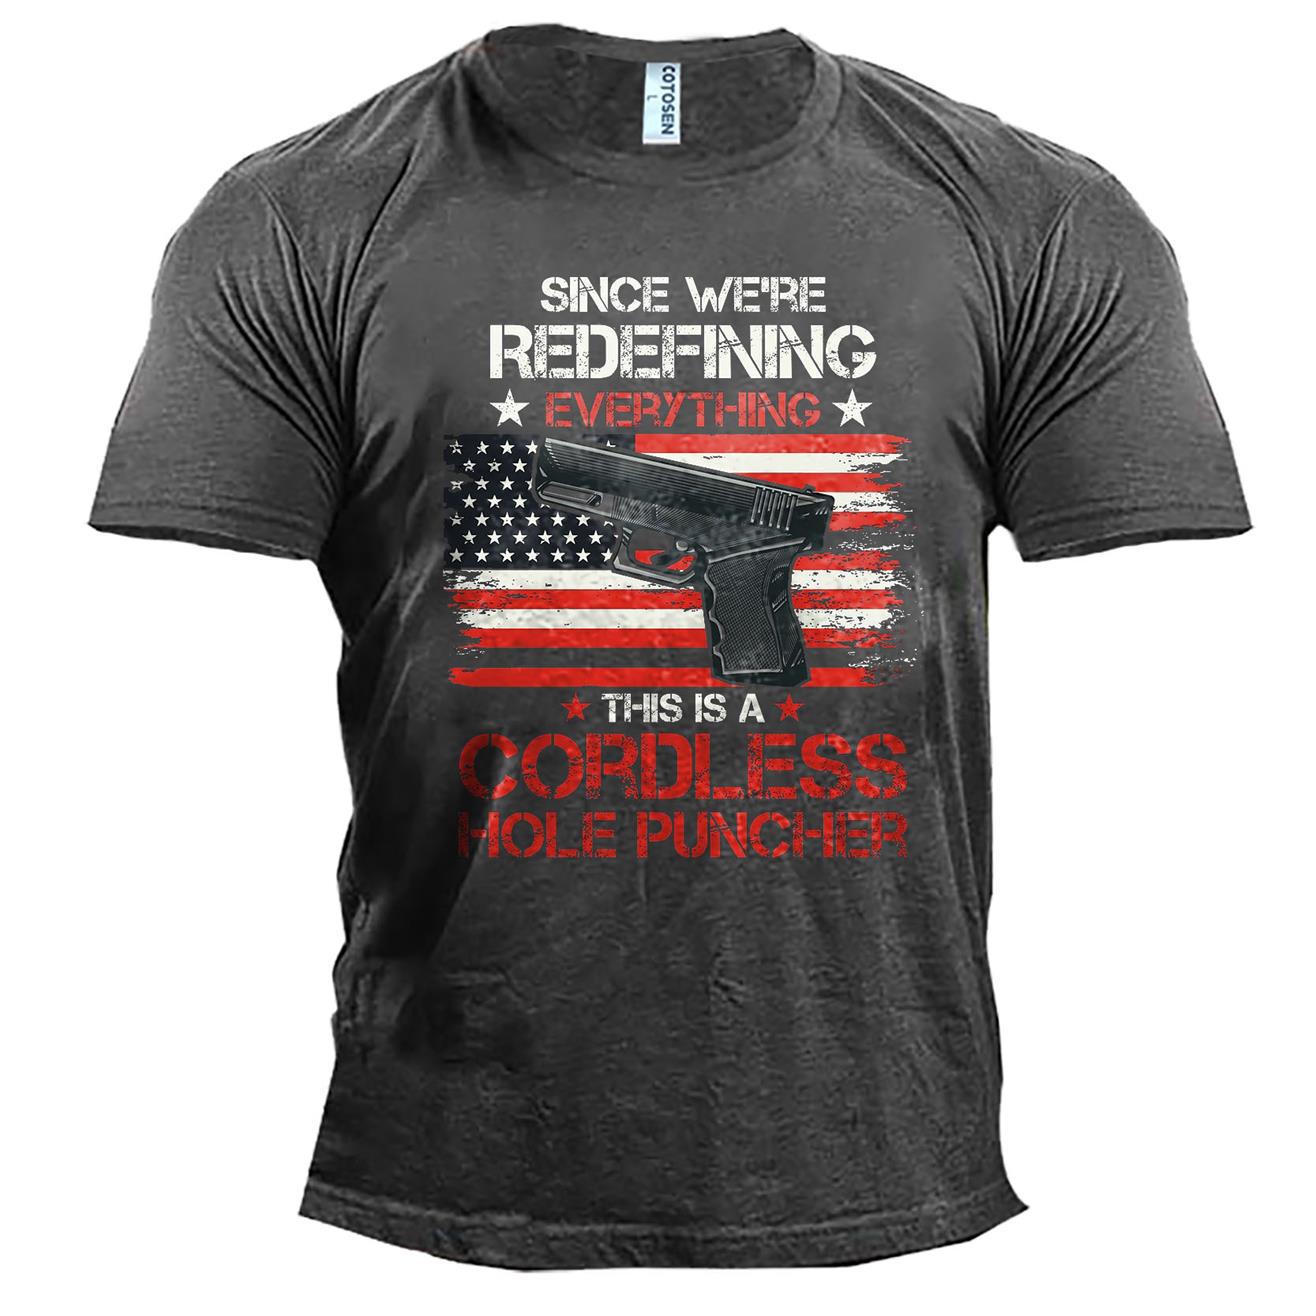 Men's Since We're Redefining Chic Everything Cordless Hole Puncher Cotton T-shirt